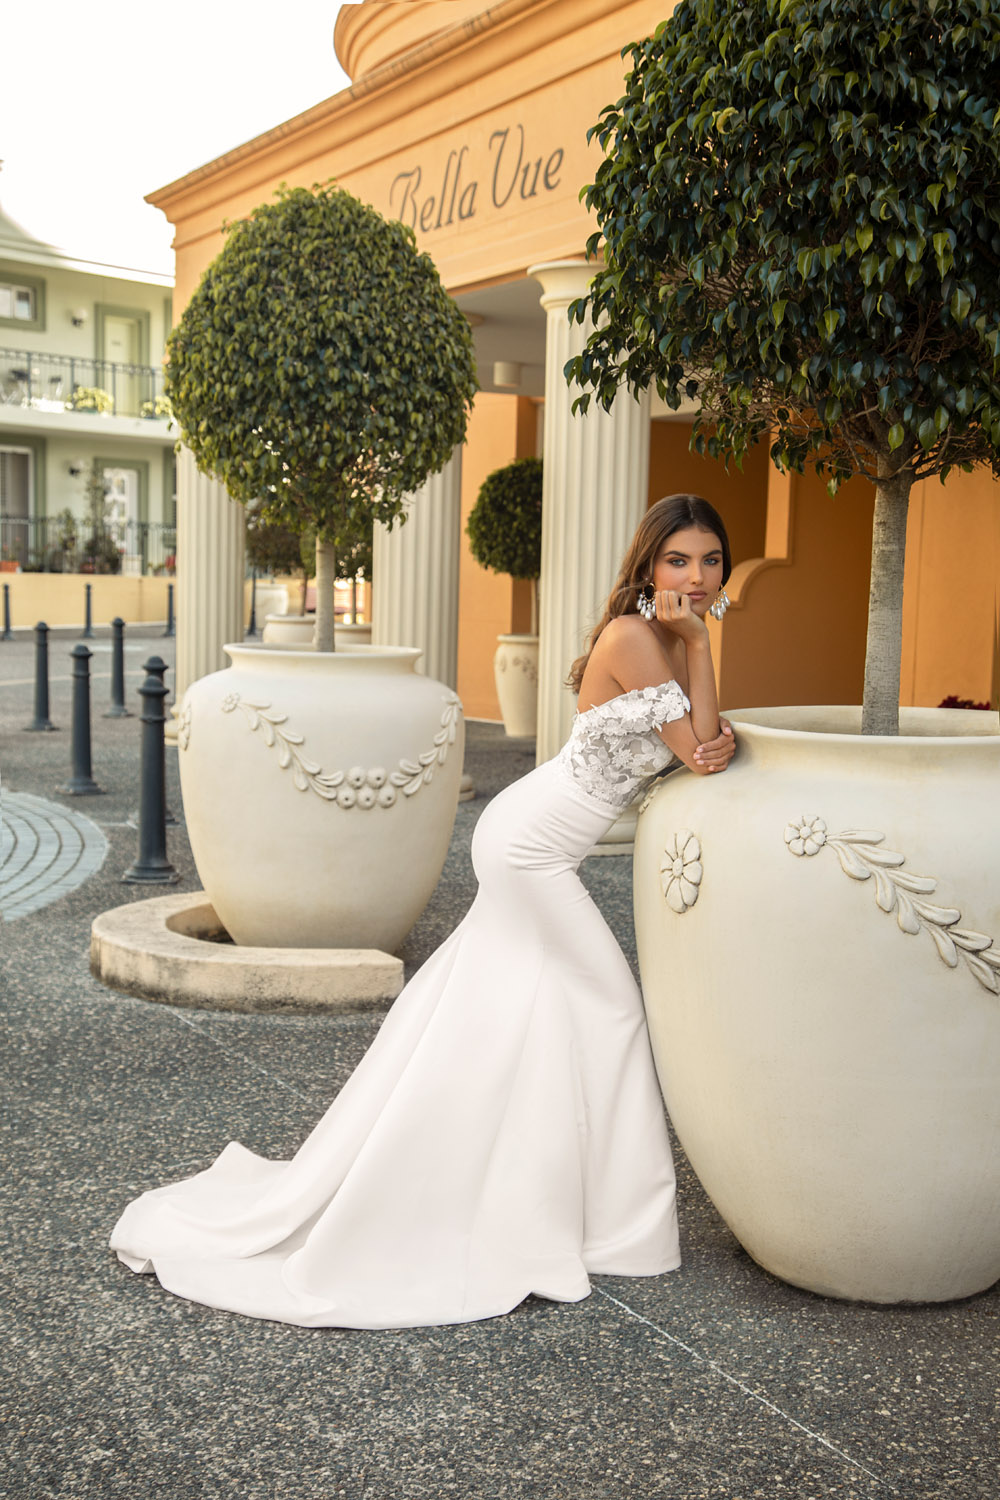 https://madilane.com/wp-content/uploads/2021/07/ELORA-MAE-ML19600-SOFT-SCOOP-NECKLINE-FLORAL-LACE-BODICE-GOWN-WITH-FITTED-CREPE-SKIRT-AND-DETACHABLE-OFF-SHOULDER-STRAPS-MATCHING-VEIL-WEDDING-DRESS-MADI-LANE-BRIDAL2.jpg